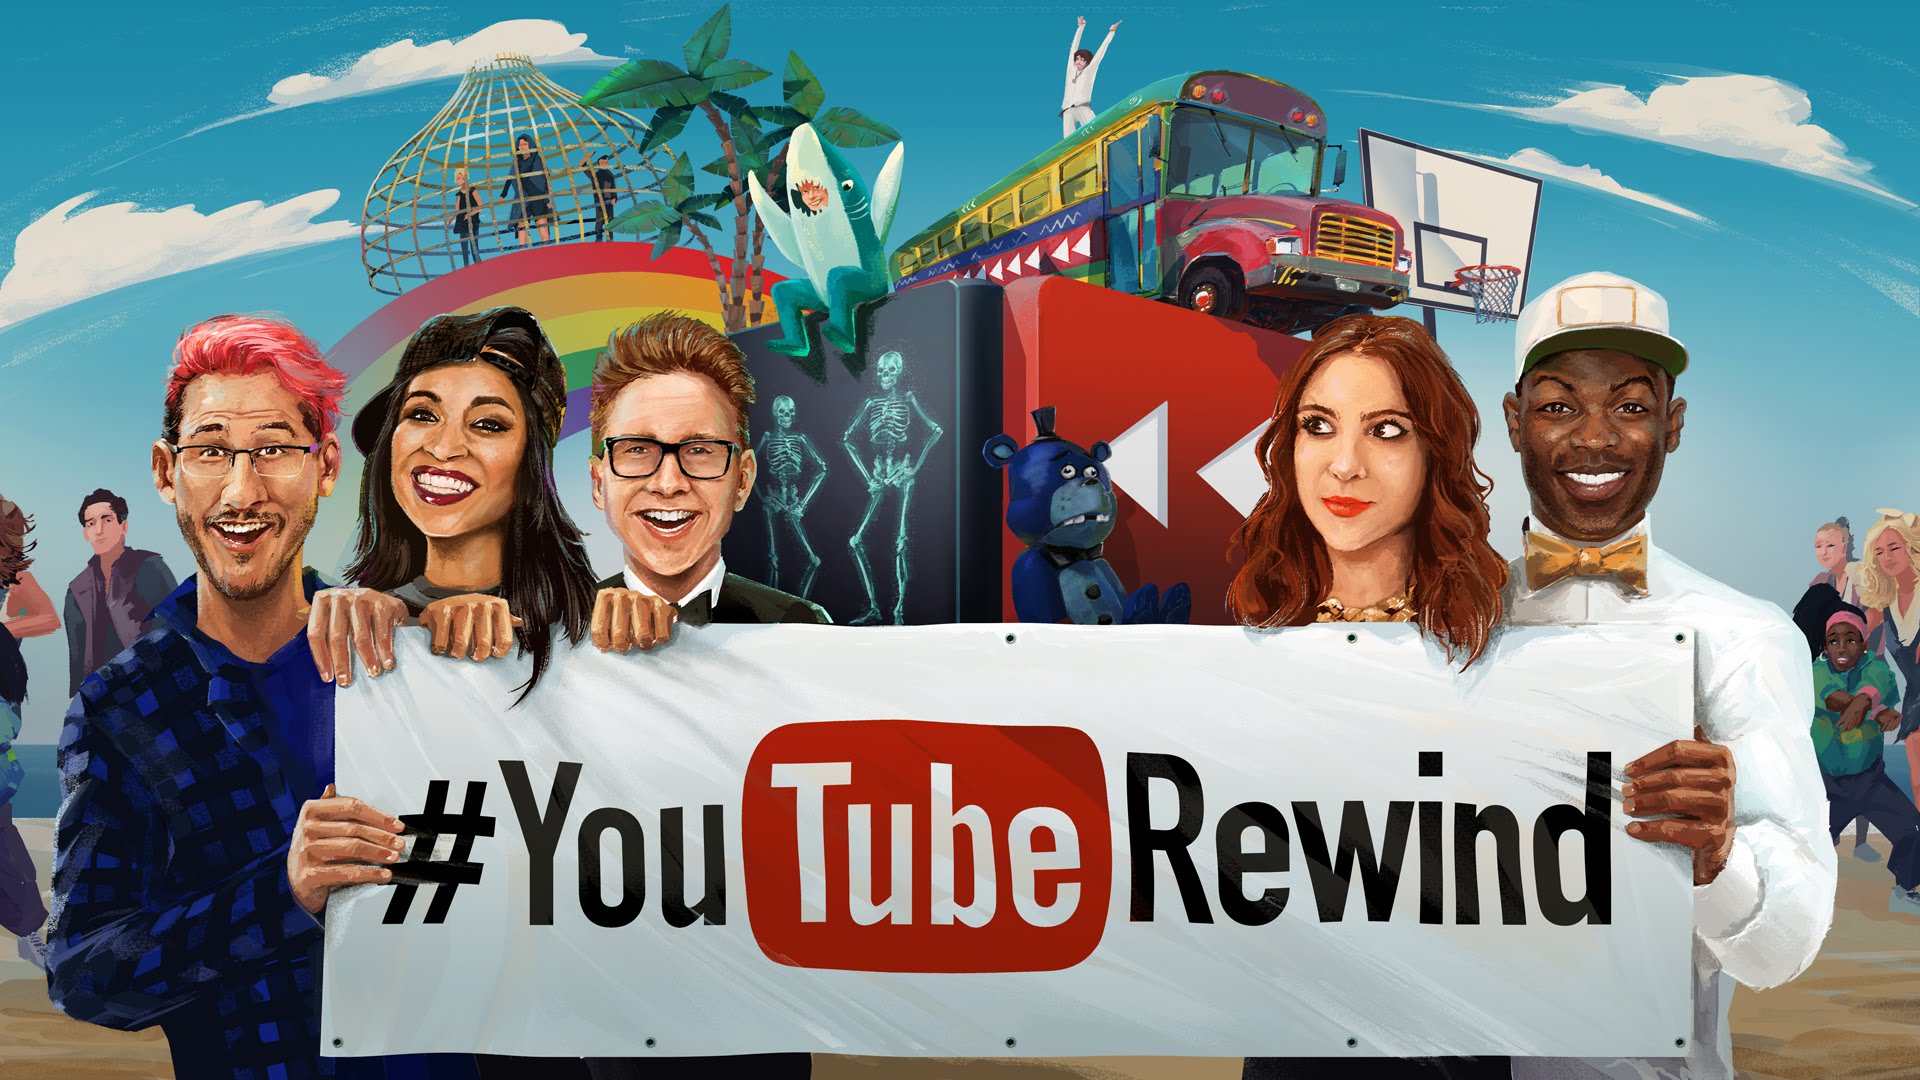 YouTube Rewind 2015 has dropped!